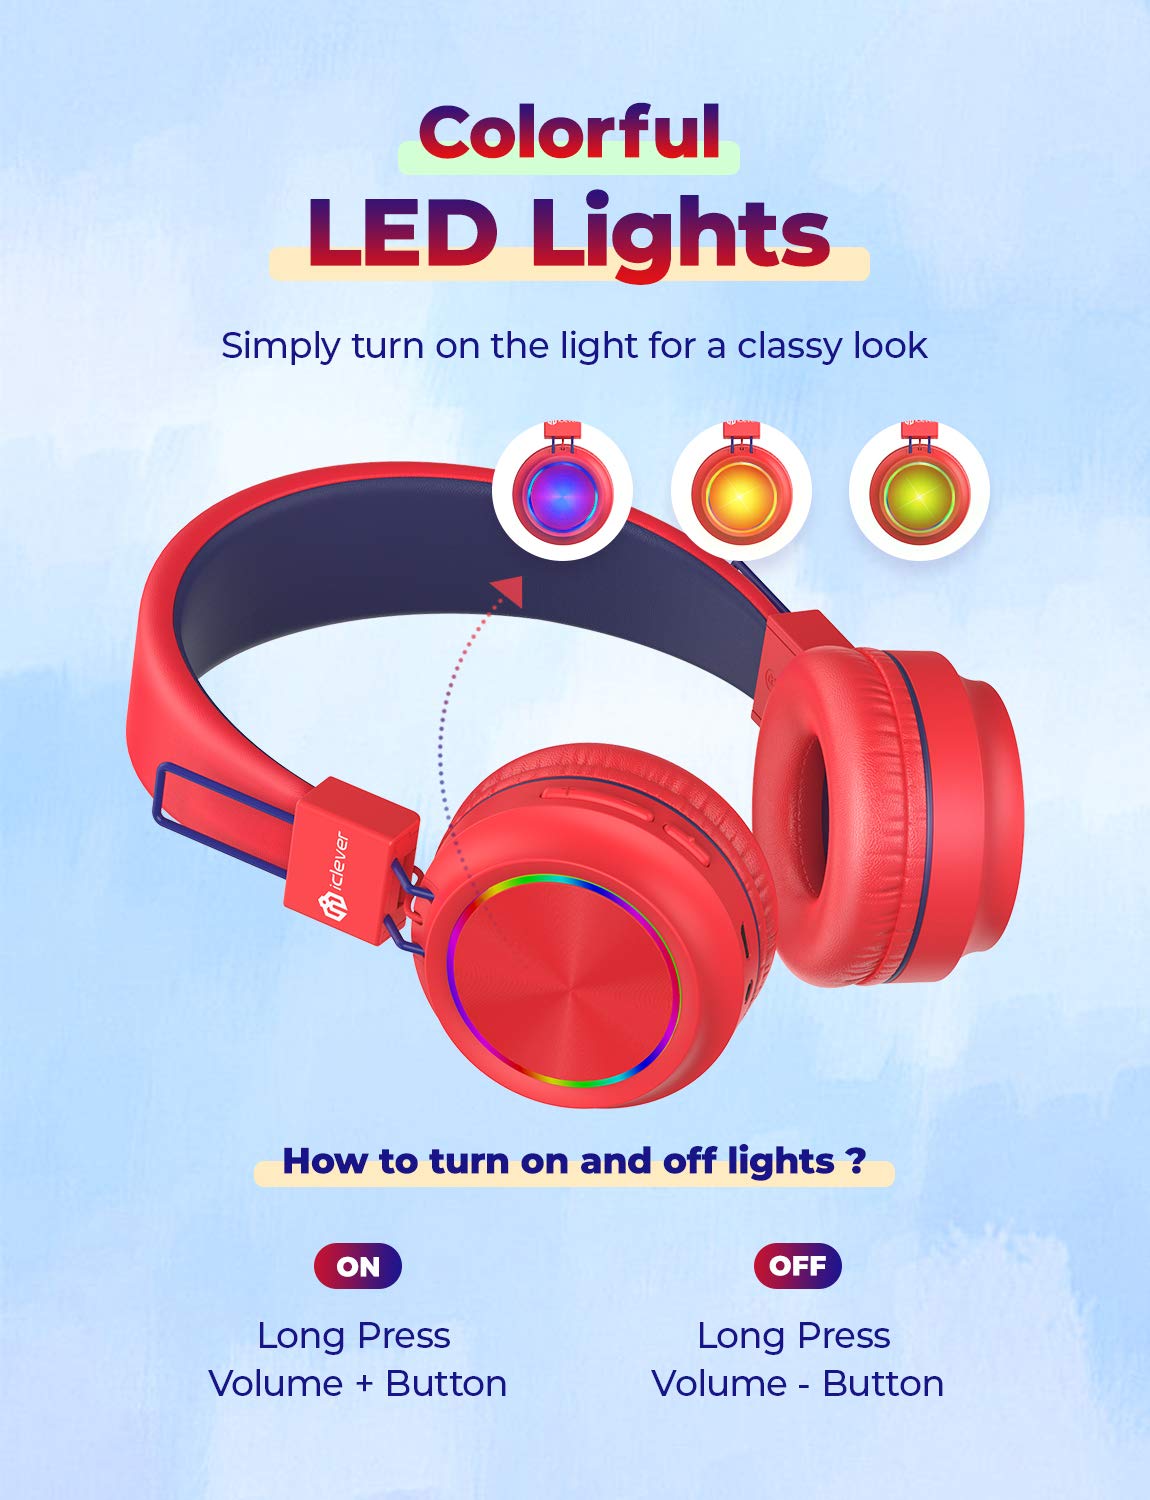 iClever BTH03 Kids Wireless Headphones, Colorful LED Lights Kids Headphones with MIC, 25H Playtime, Stereo Sound, Bluetooth 5.0, Foldable, Childrens Headphones on Ear for Study Tablet Airplane, Red